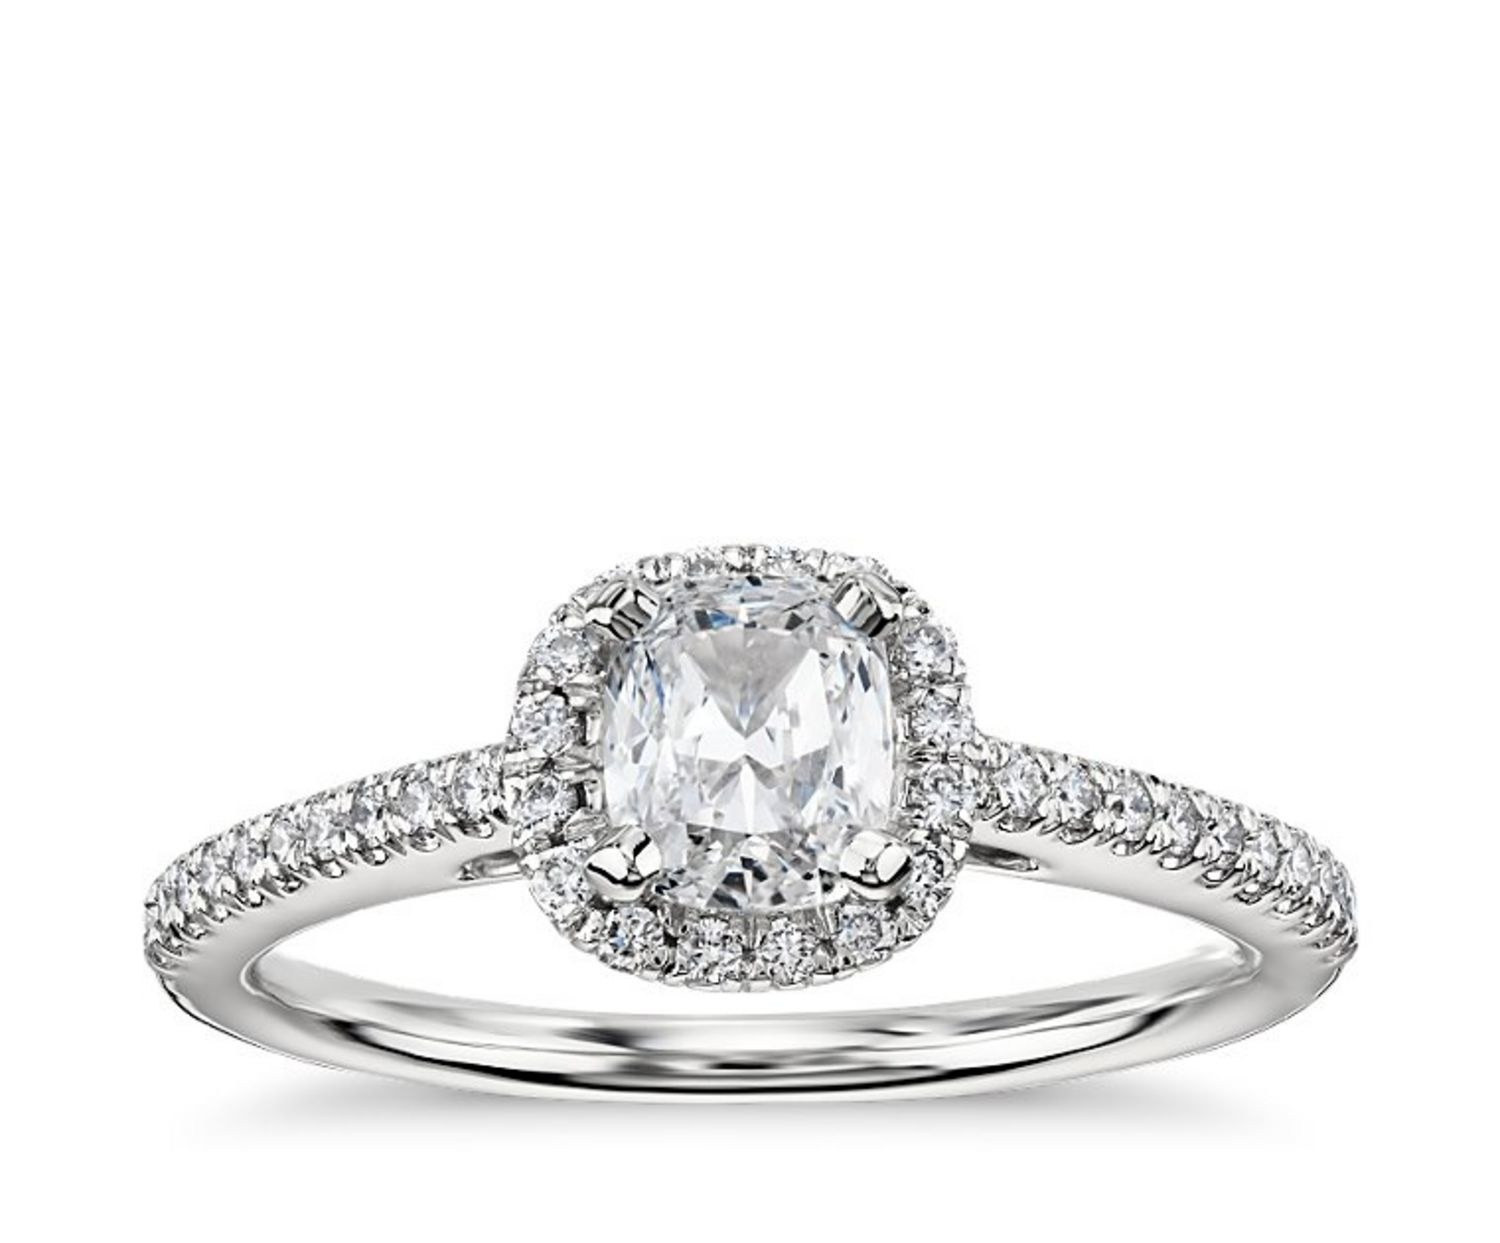 Best Wedding Ring
 The 4 Engagement Ring Styles Everyone Will Be Coveting in